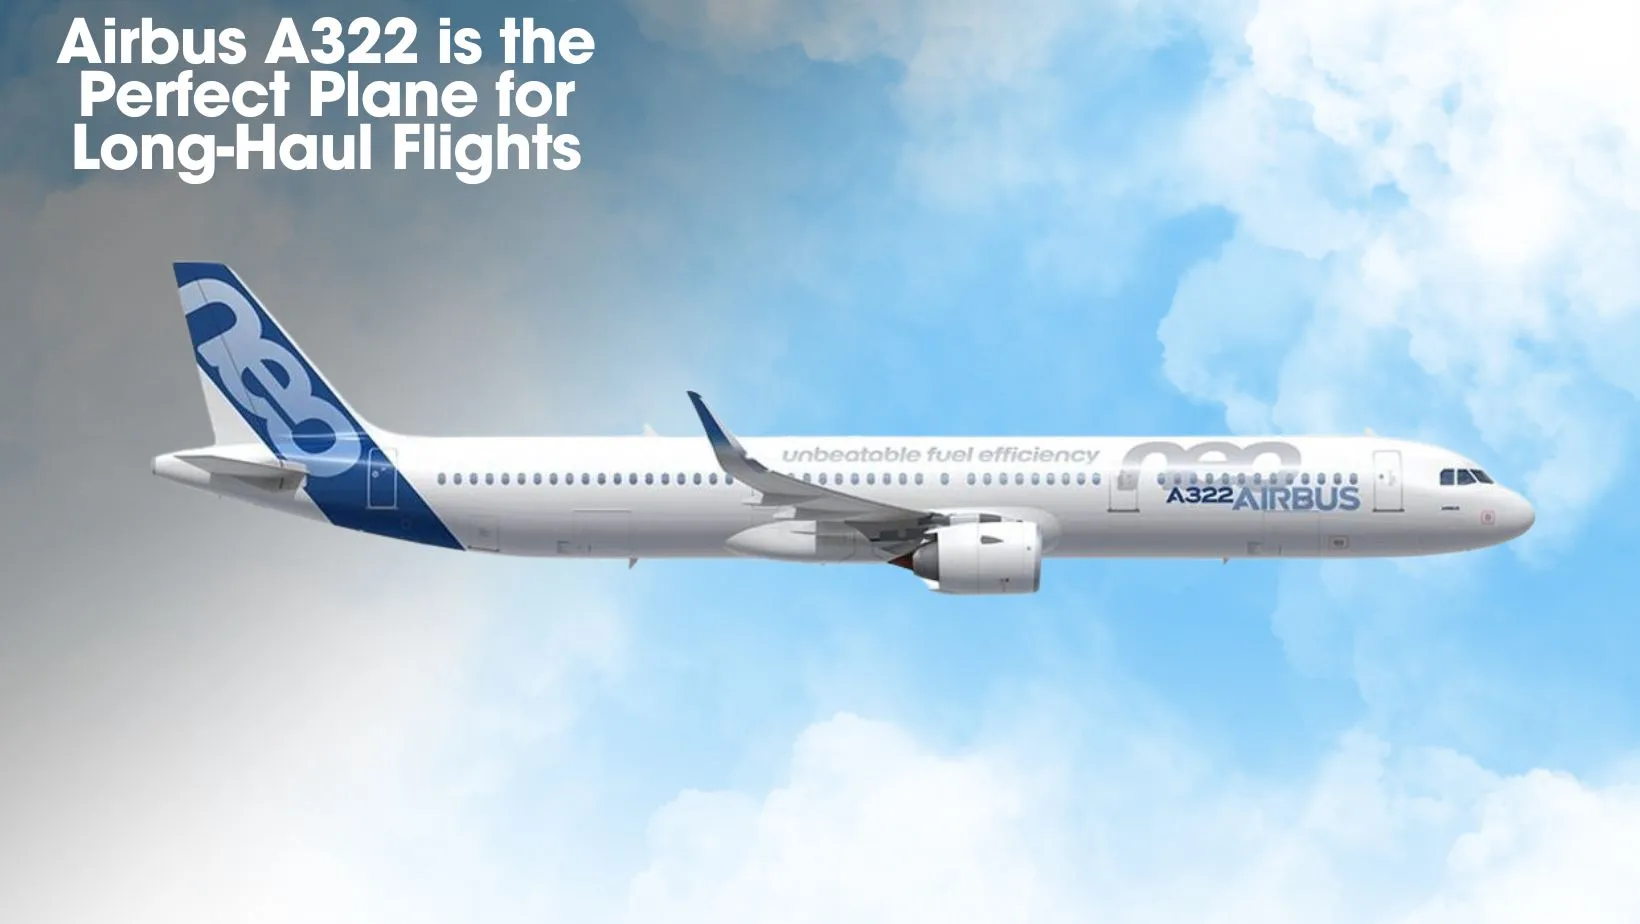 Why the Airbus A322 is the Perfect Plane for Long-Haul Flights?